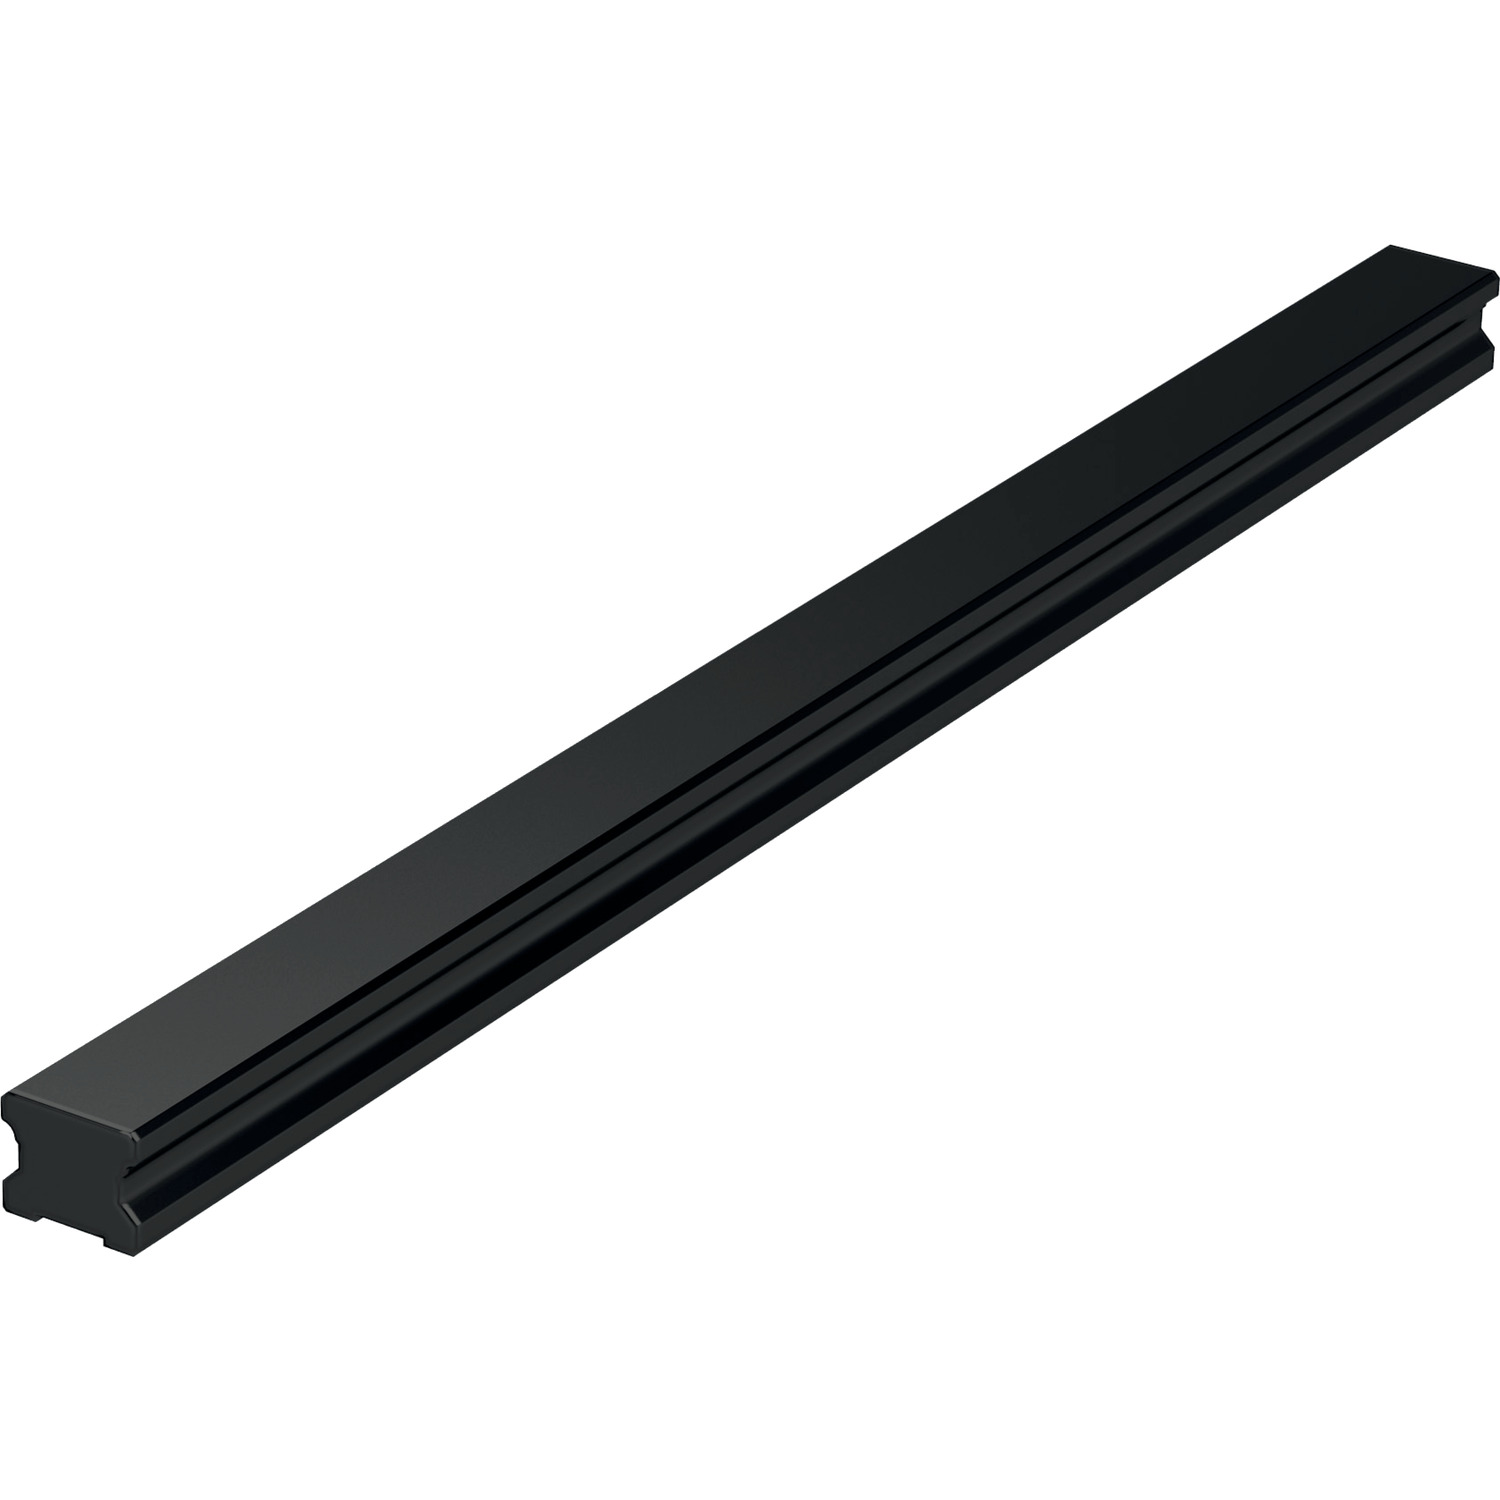 15mm Linear Guide Rail Rear fixing blackened 15mm rails. Custom sizes also available.